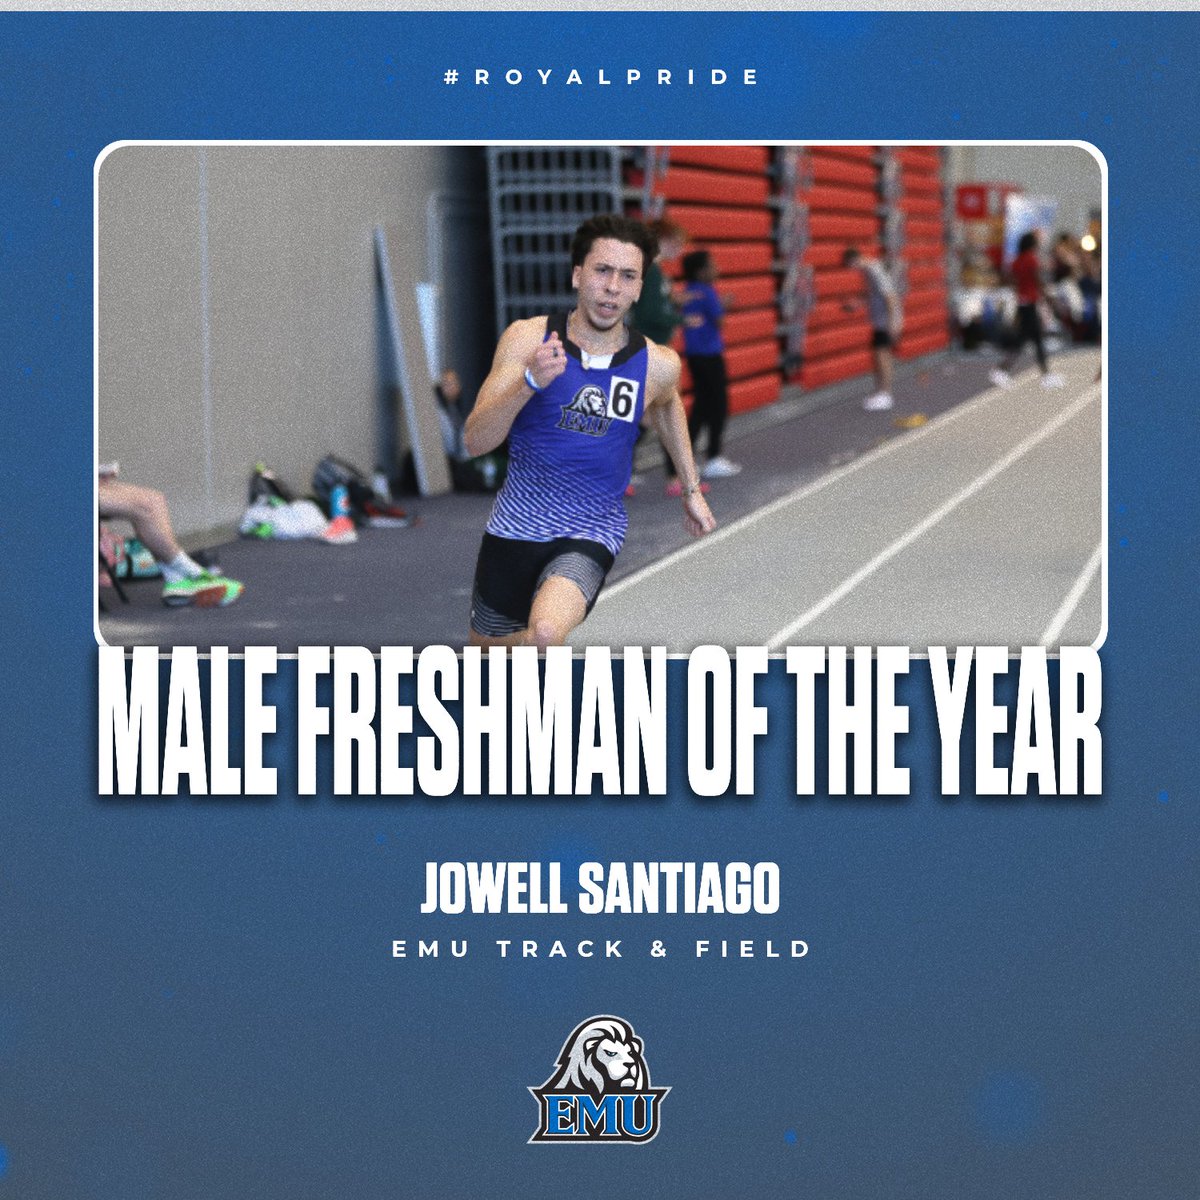 These two Royals made a great first impression! 𝐂𝐎𝐍𝐆𝐑𝐀𝐓𝐔𝐋𝐀𝐓𝐈𝐎𝐍𝐒 to Angel David and Jowell Gonzalez-Santiago of @EMU_XC_TF on earning 𝐅𝐫𝐞𝐬𝐡𝐦𝐚𝐧 𝐀𝐭𝐡𝐥𝐞𝐭𝐞 𝐨𝐟 𝐭𝐡𝐞 𝐘𝐞𝐚𝐫! 👏 📰tinyurl.com/4yv6mefc #RoyalPride | #CompeteTogether